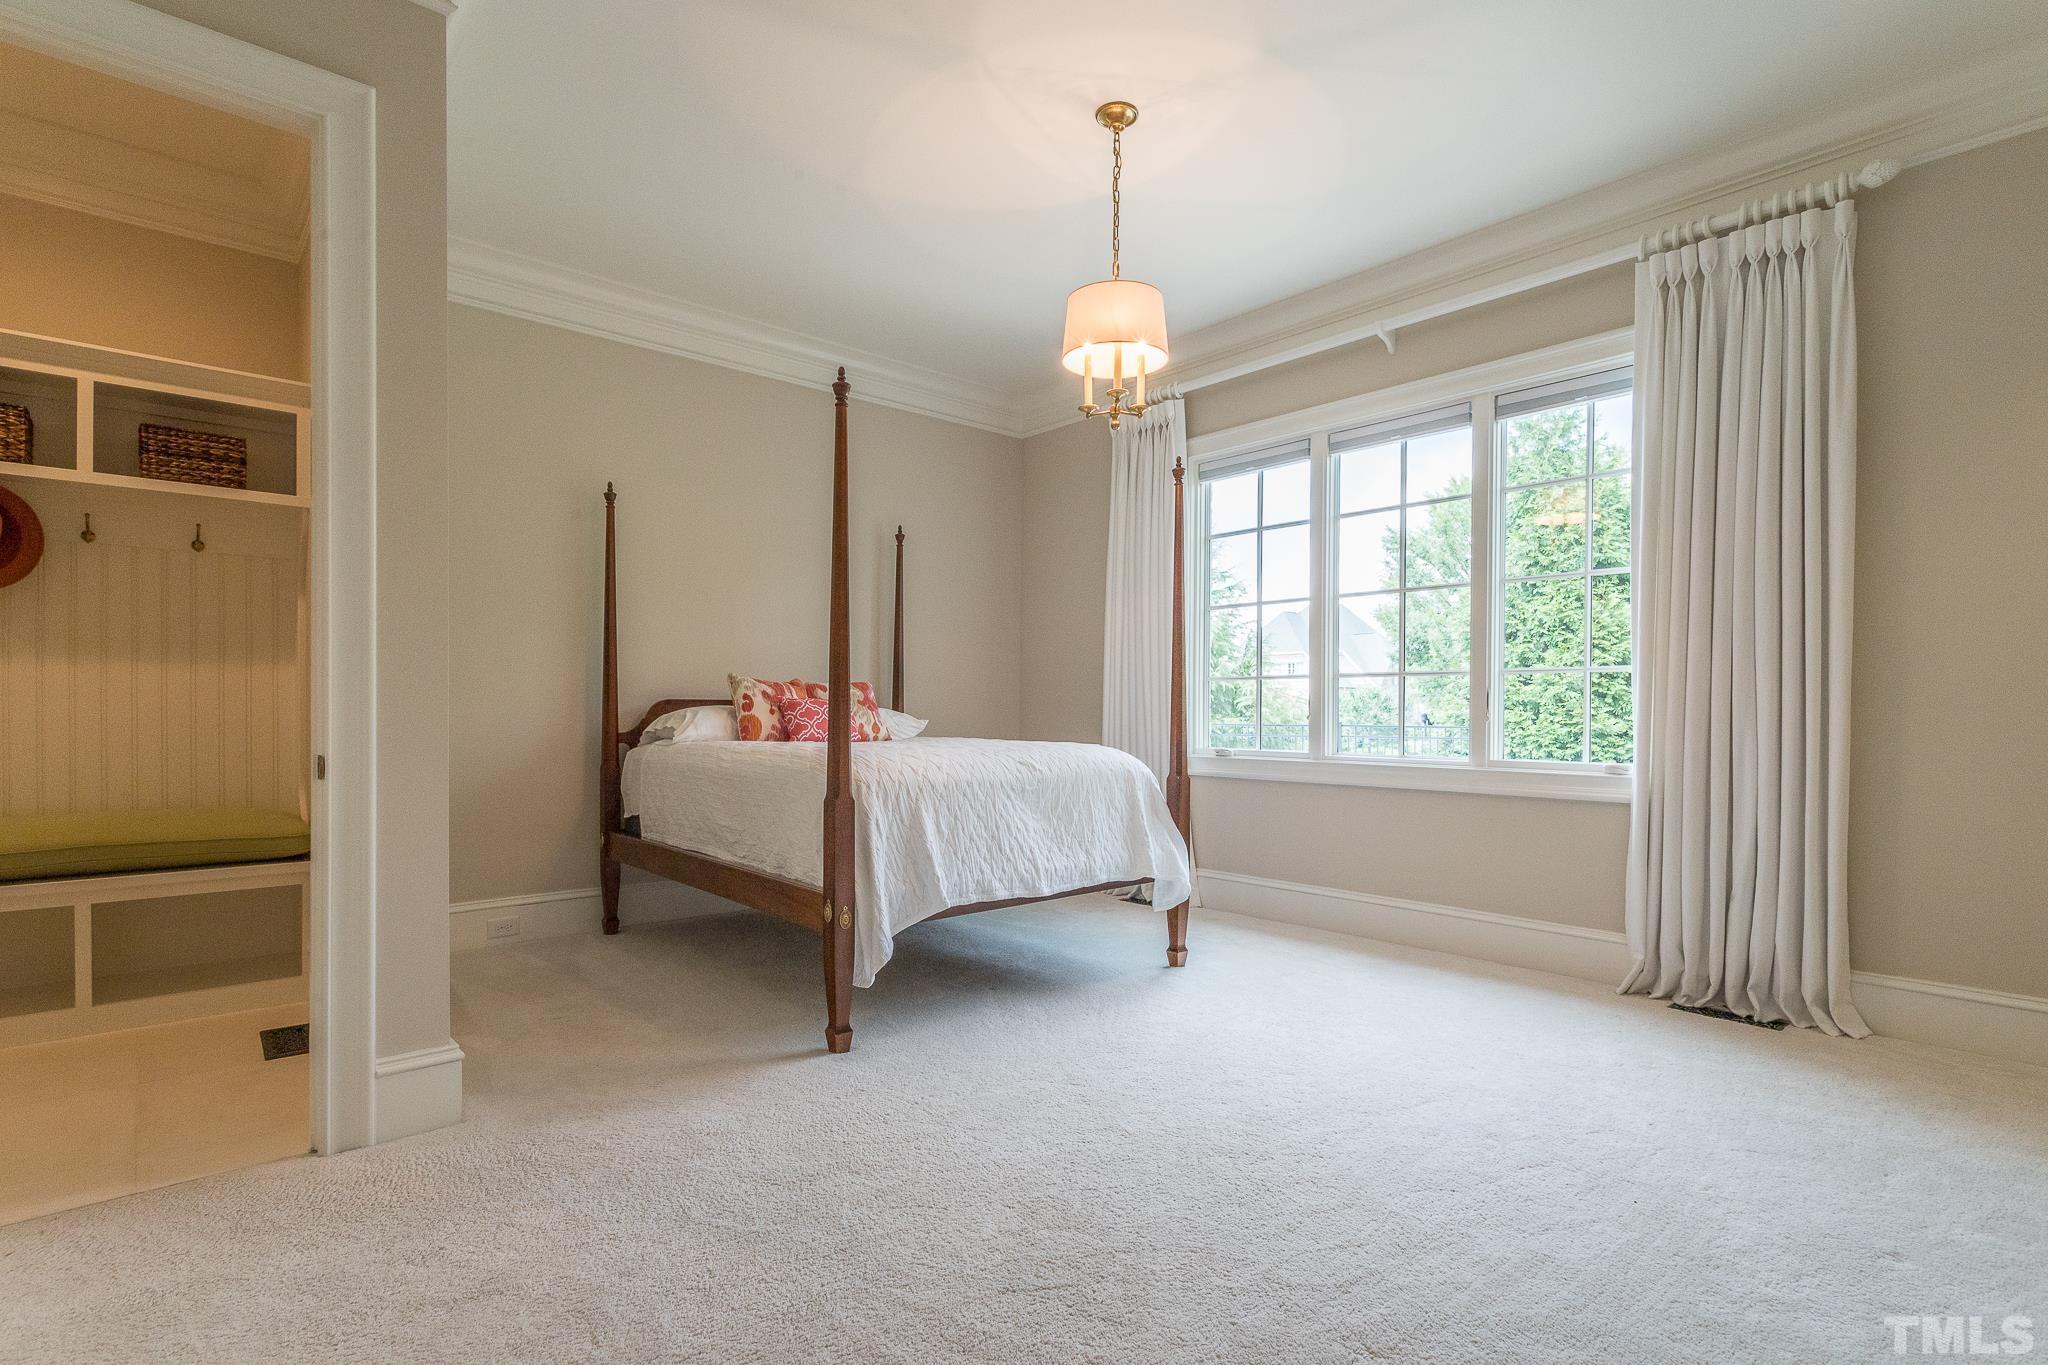 This downstairs suite has a private entry making this perfect for guests, family, or a second master suite option